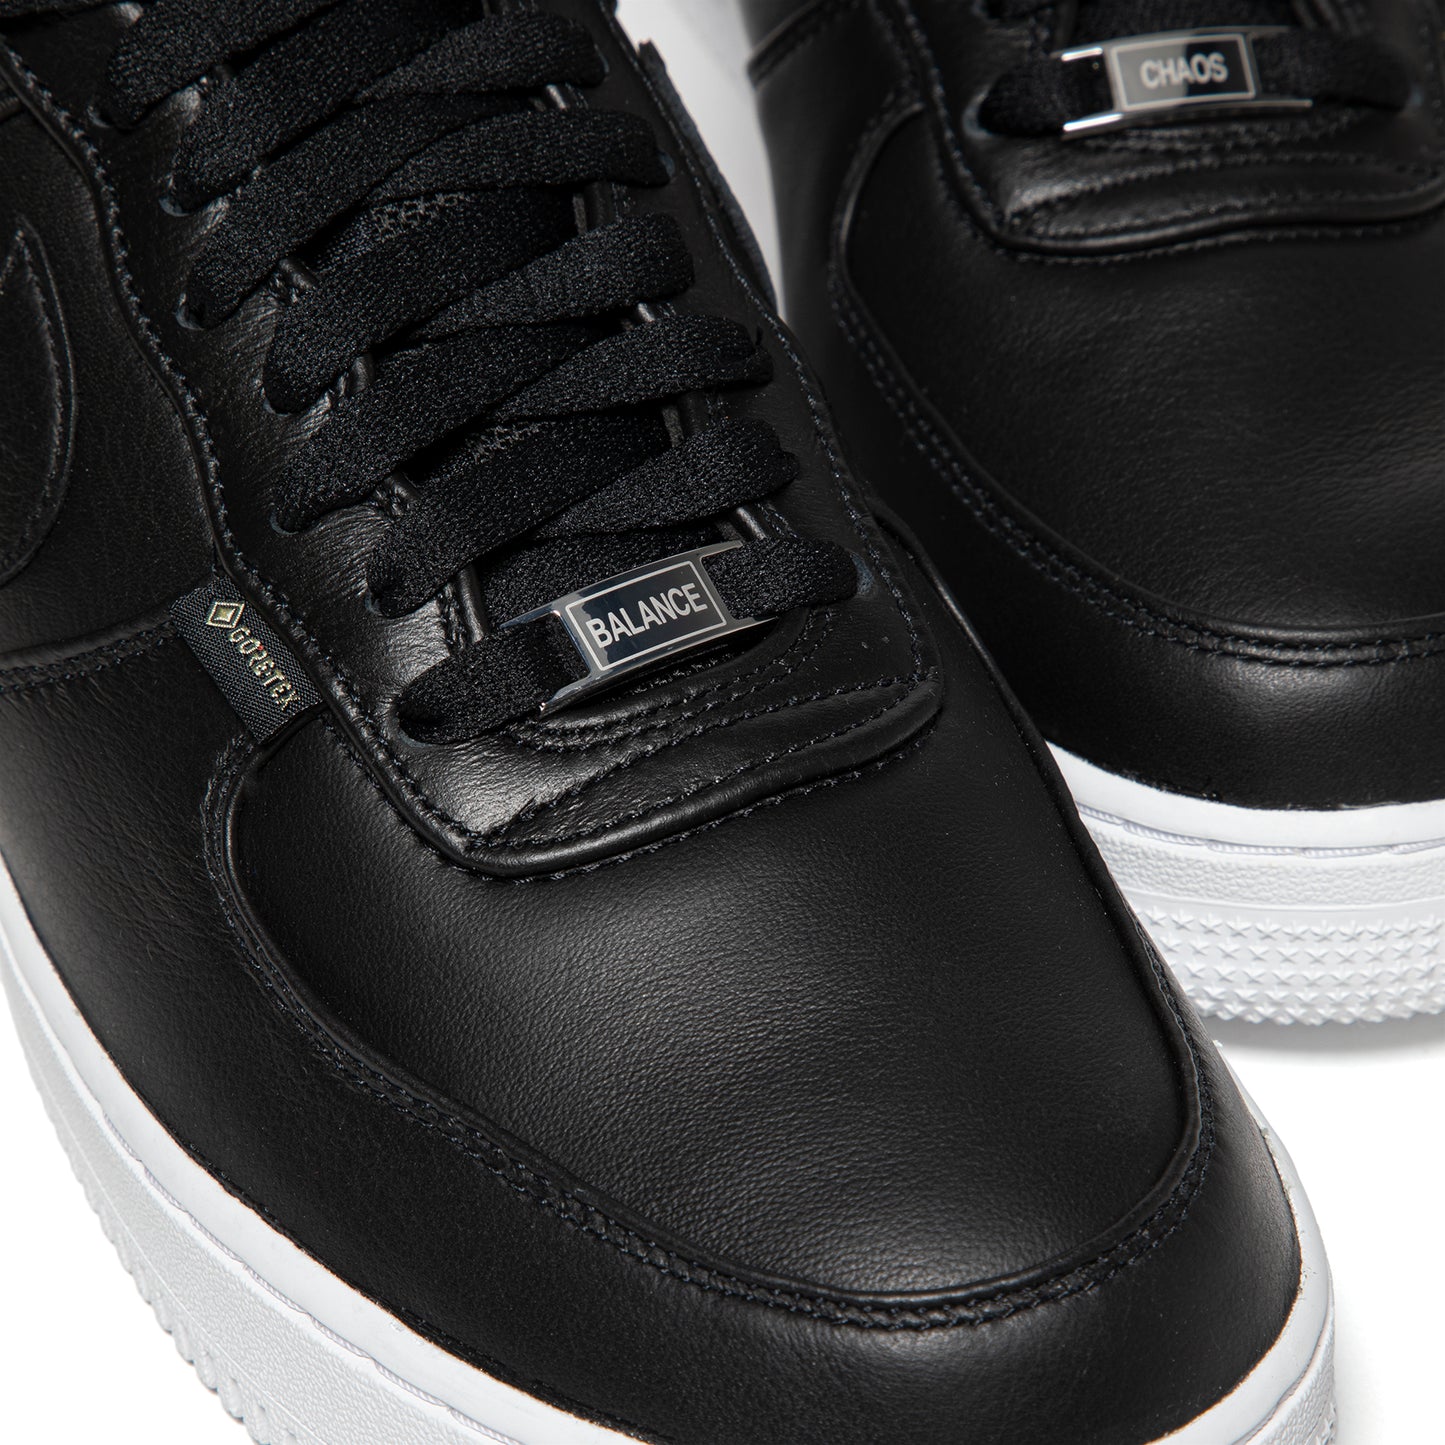 Nike x UNDERCOVER Air Force 1 Low SP (Black/White)